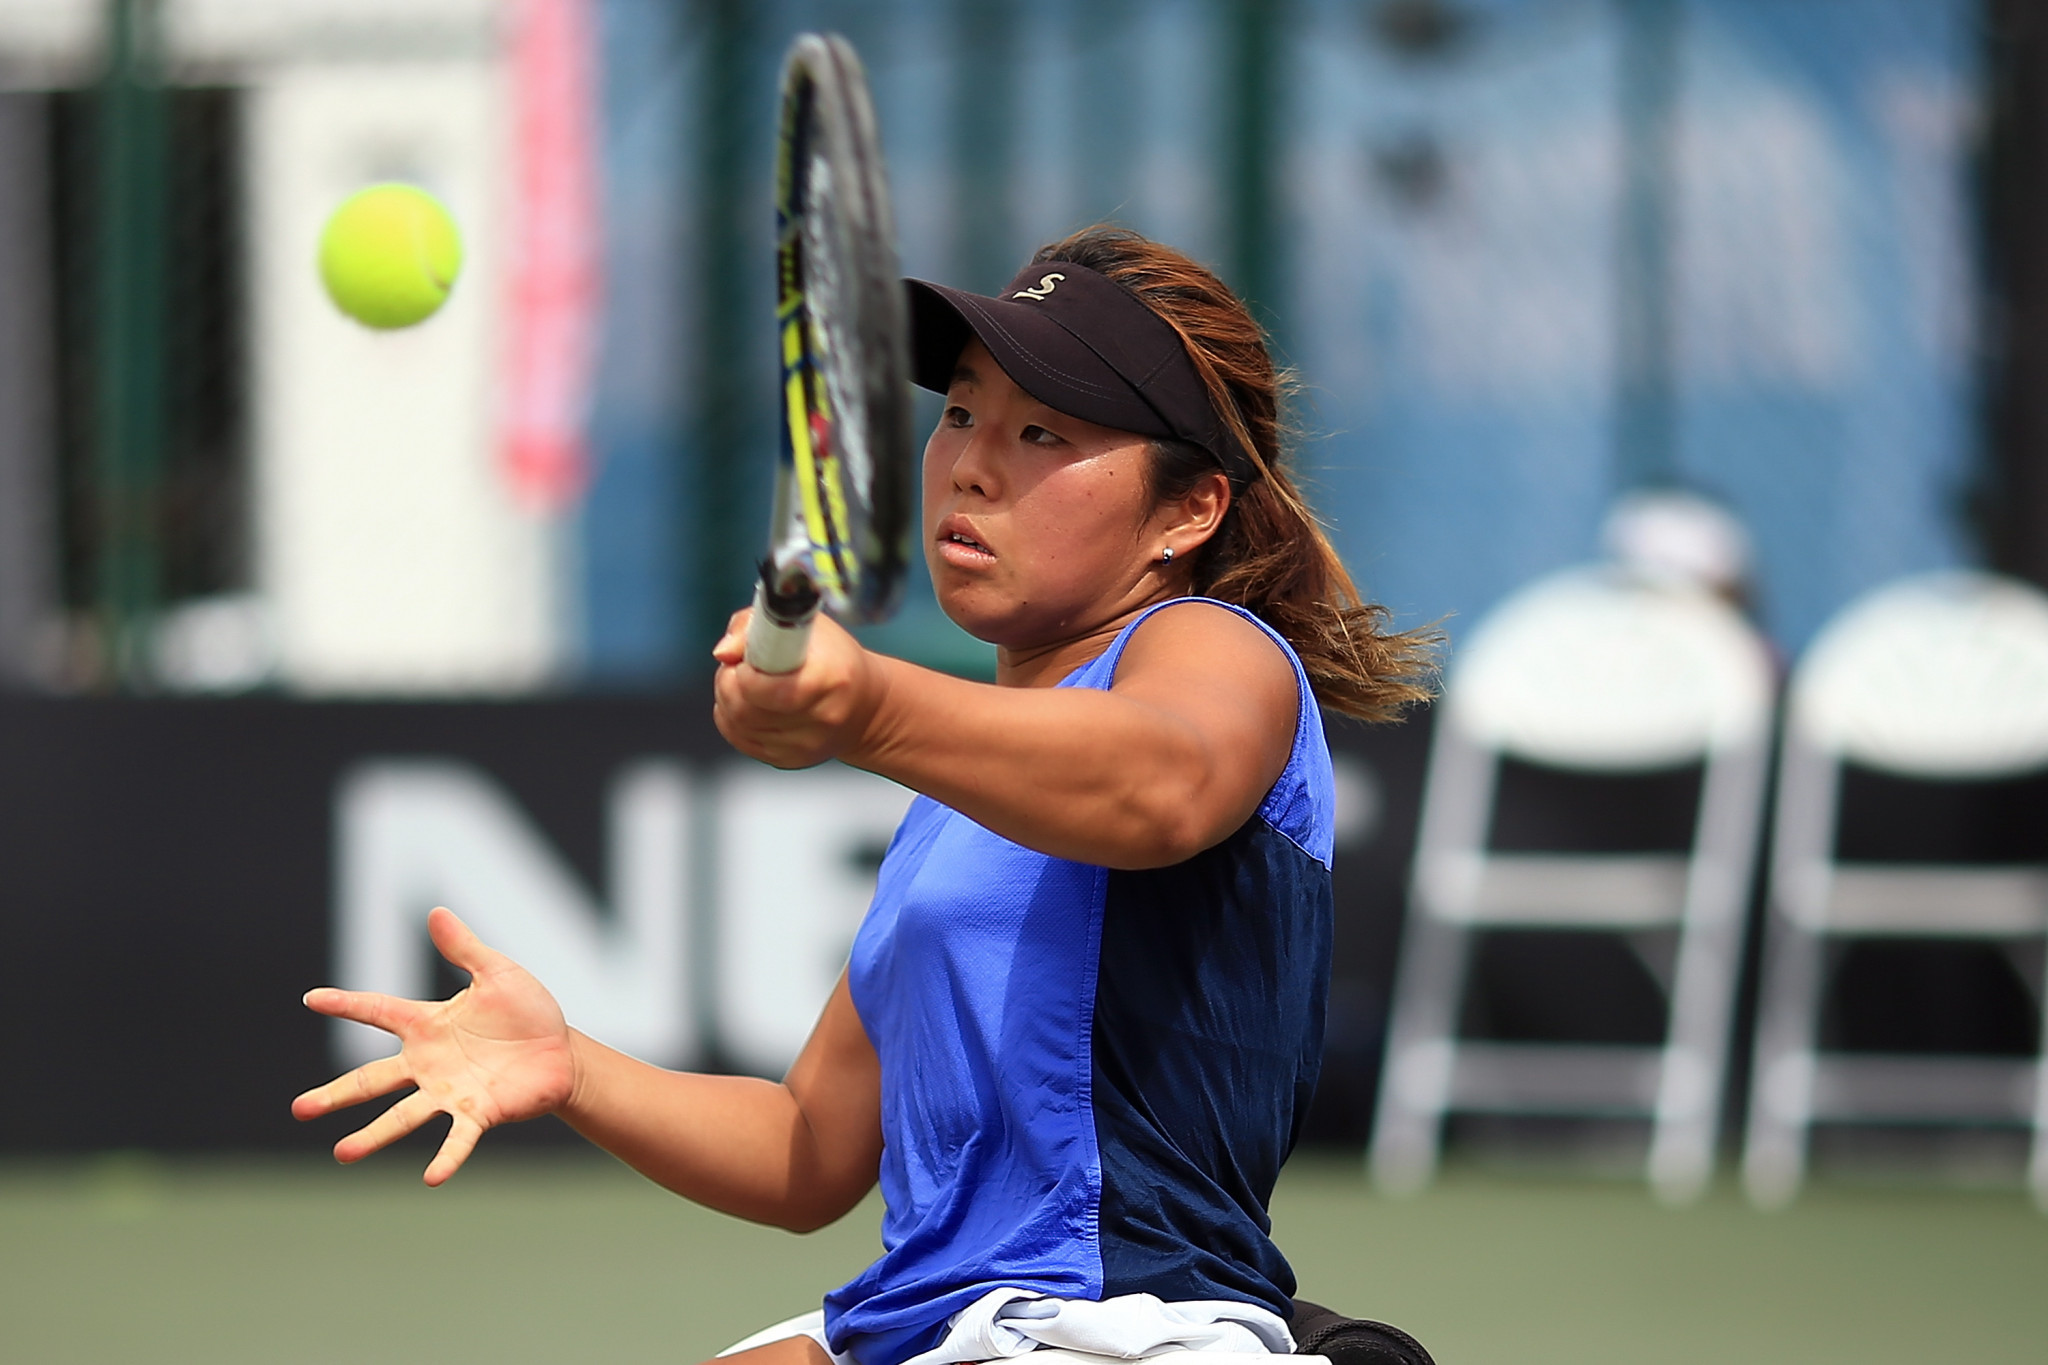 Yui Kamiji earned a convincing win in her quarter-finals match ©Getty Images